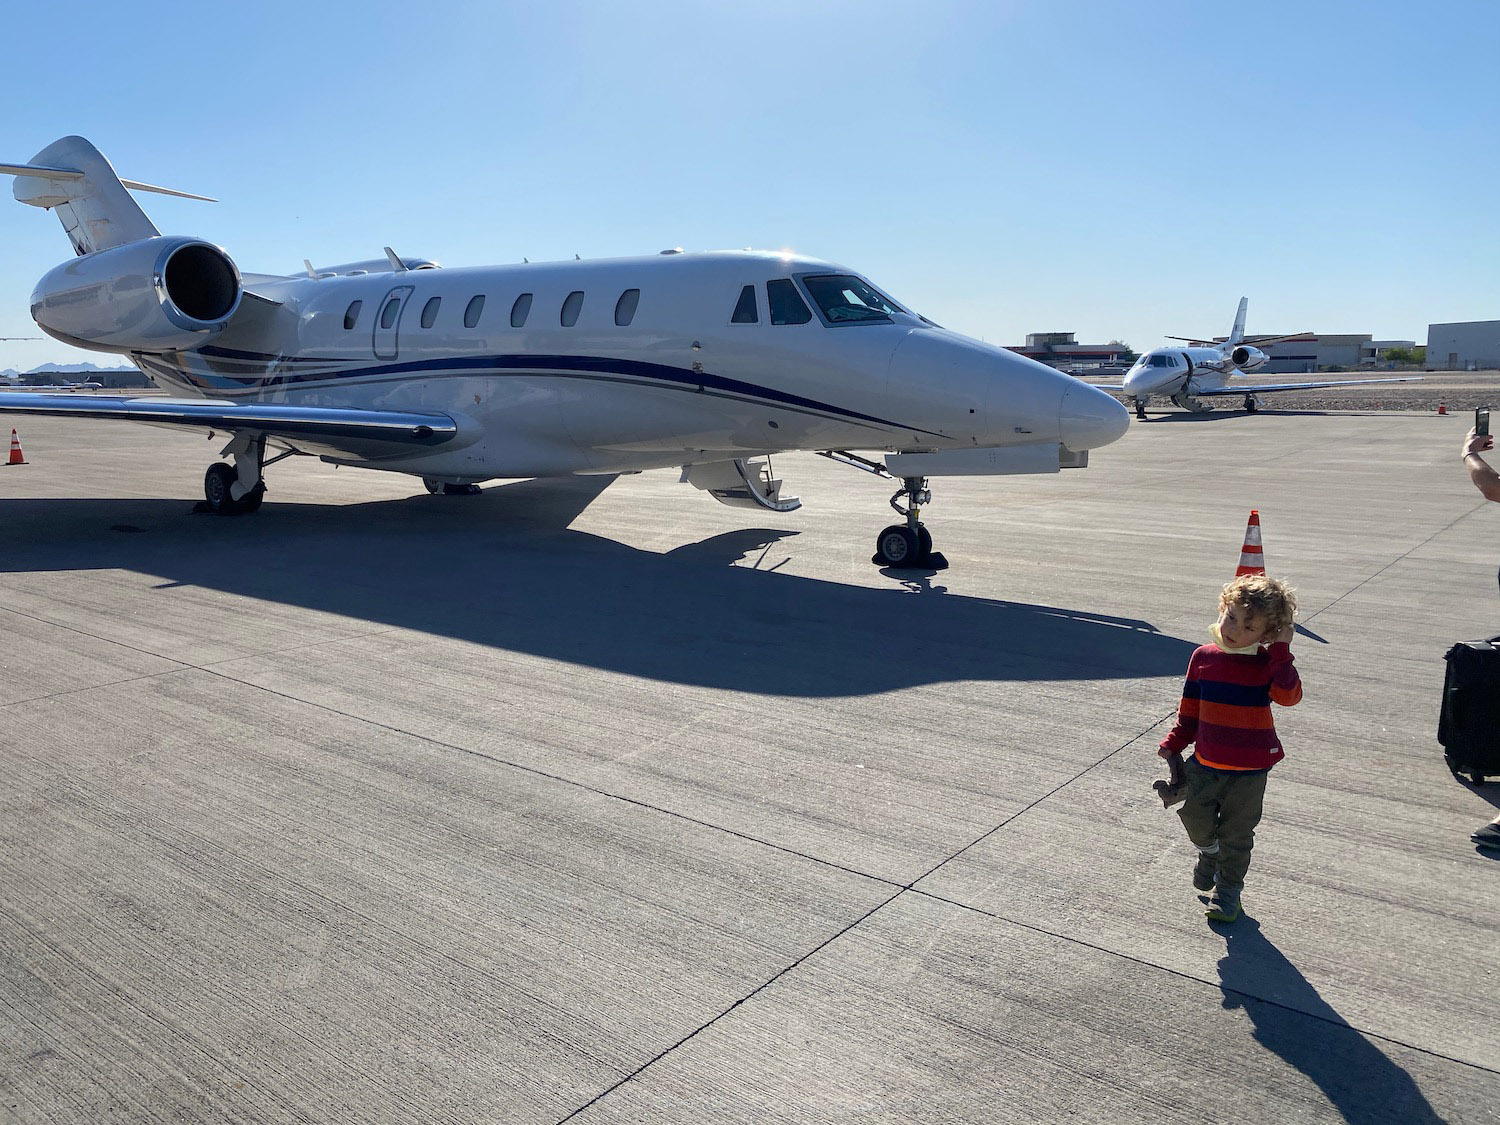 a child walking on a runway next to a plane